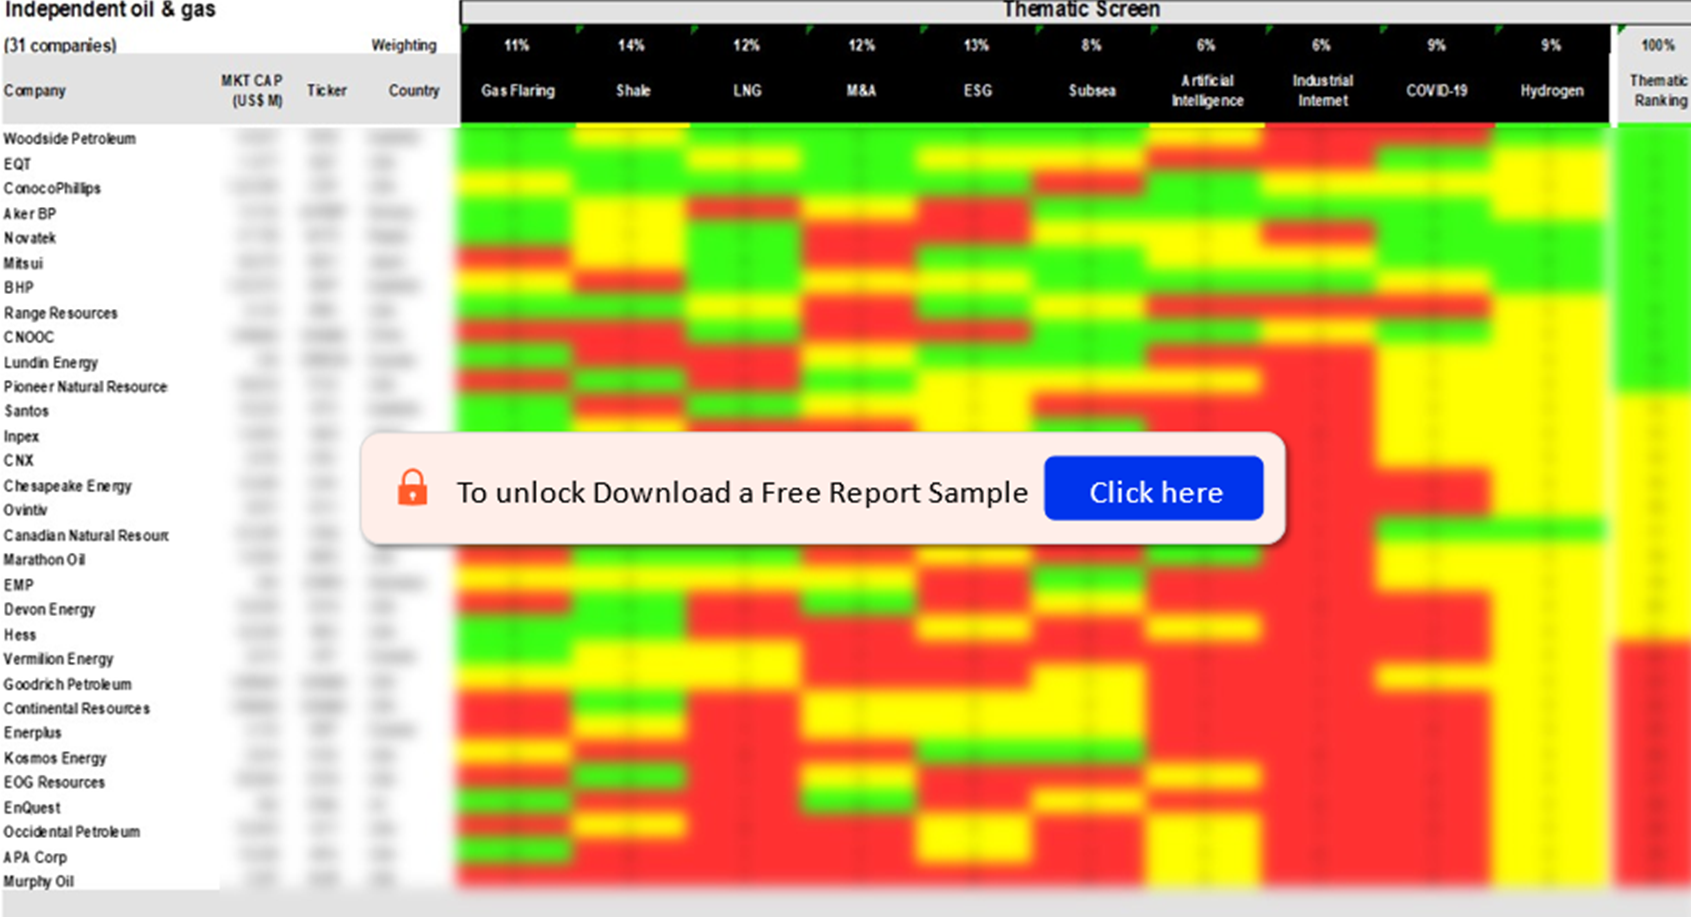 Integrated Oil and Gas Sector Scorecard – Thematic Screen